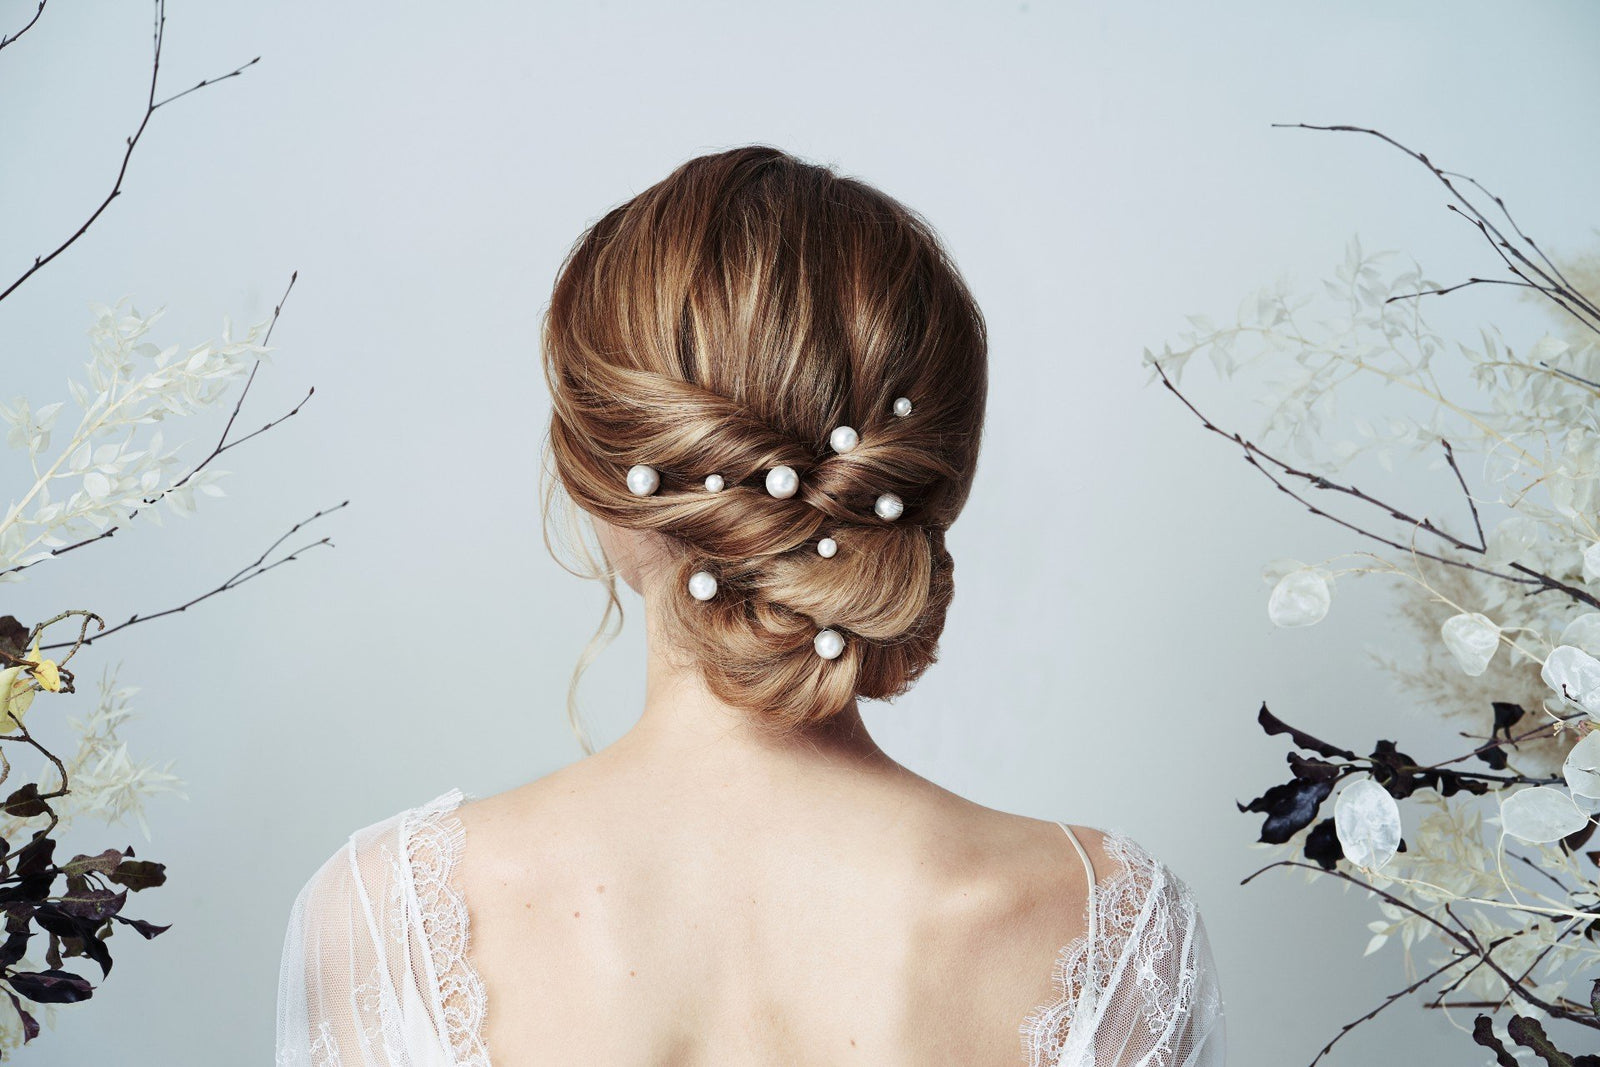 Wedding Hair Clip Jewelry With Pearls And Accessories Stock Photo -  Download Image Now - iStock